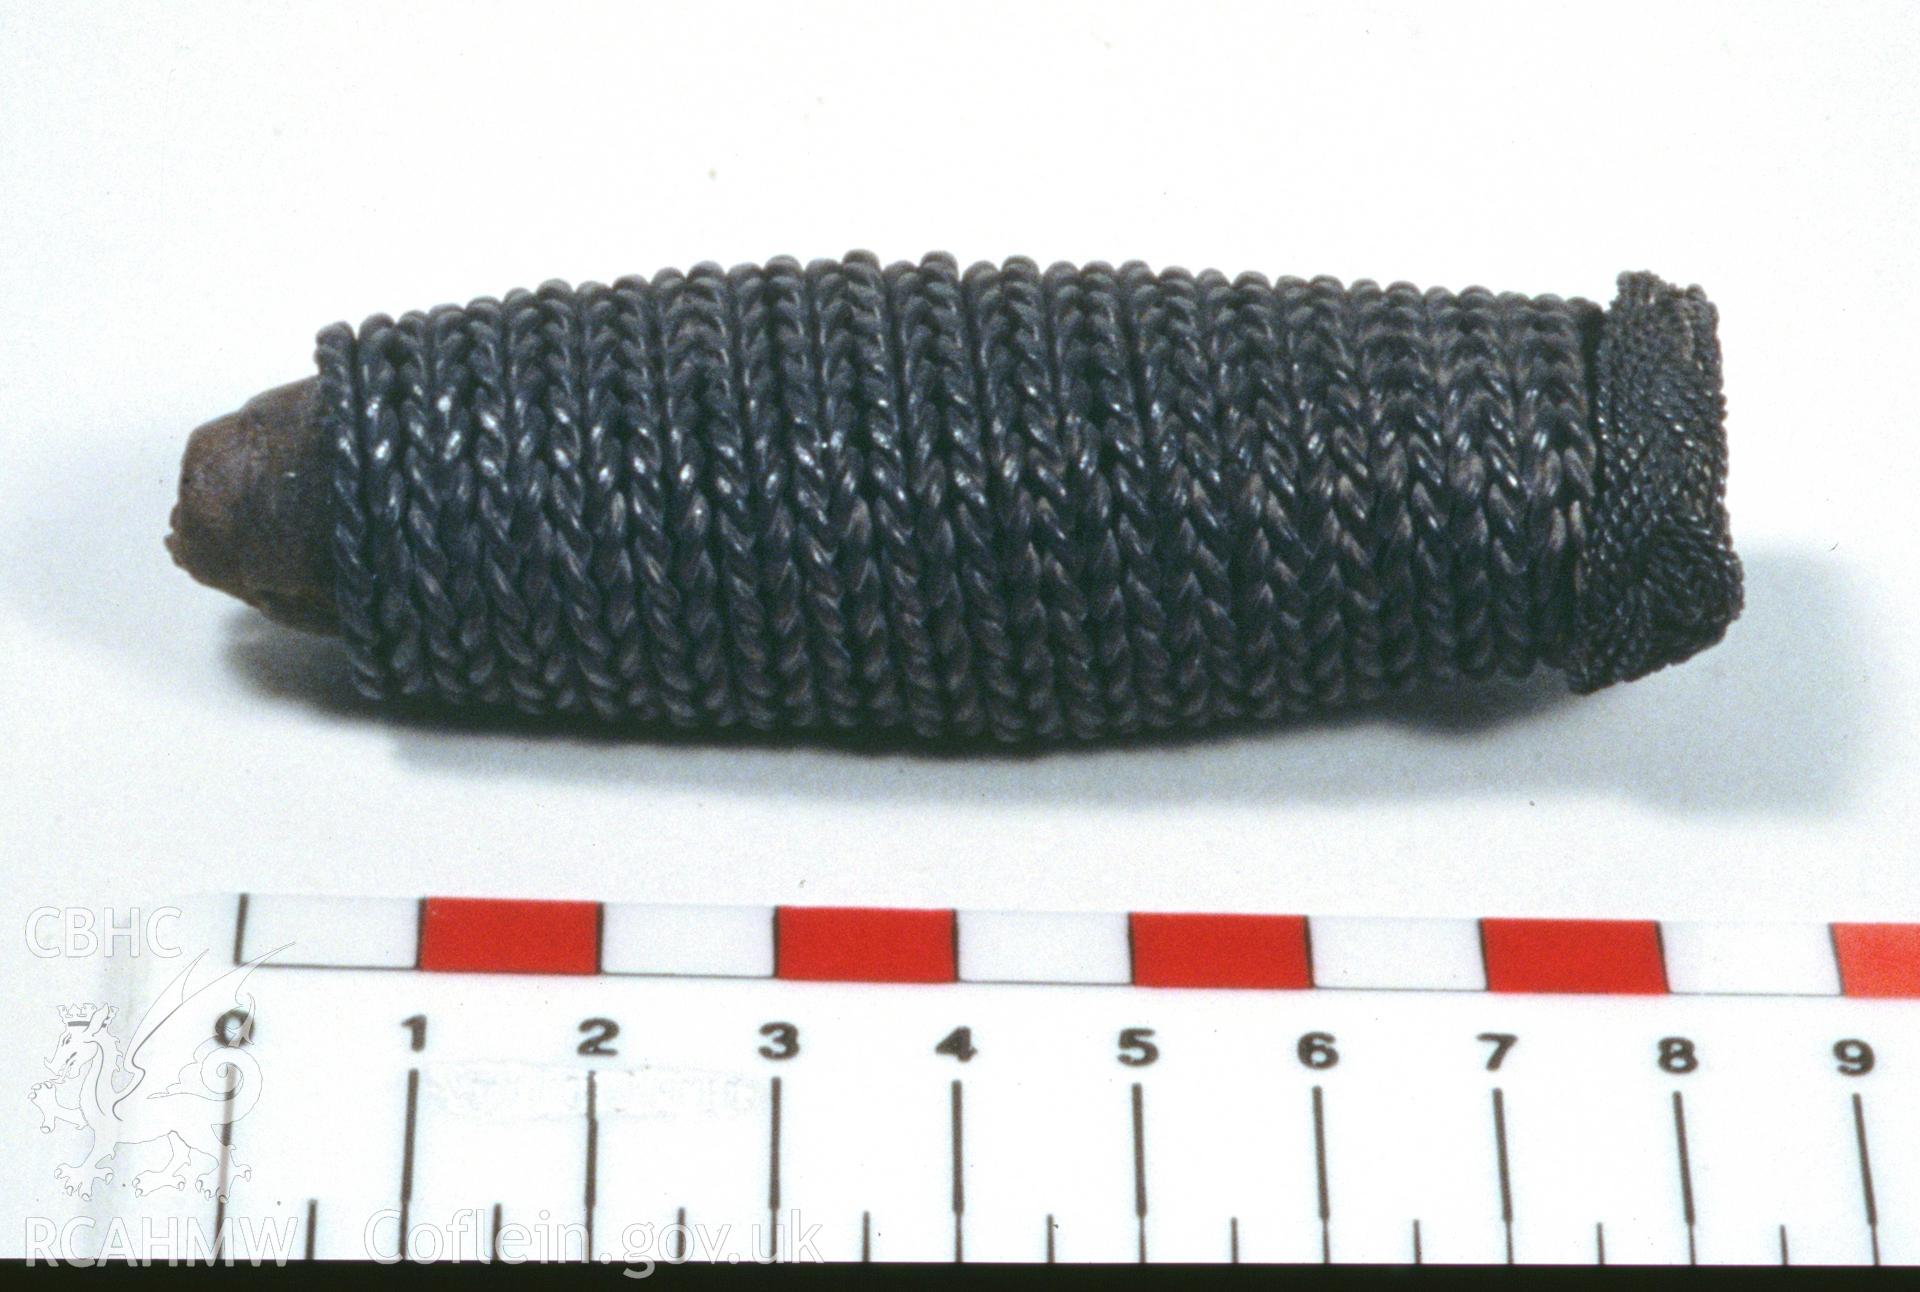 Colour slide showing find from site, sword grip, from a survey of the Mary designated shipwreck, courtesy of National Museums, Liverpool (Merseyside Maritime Museum)